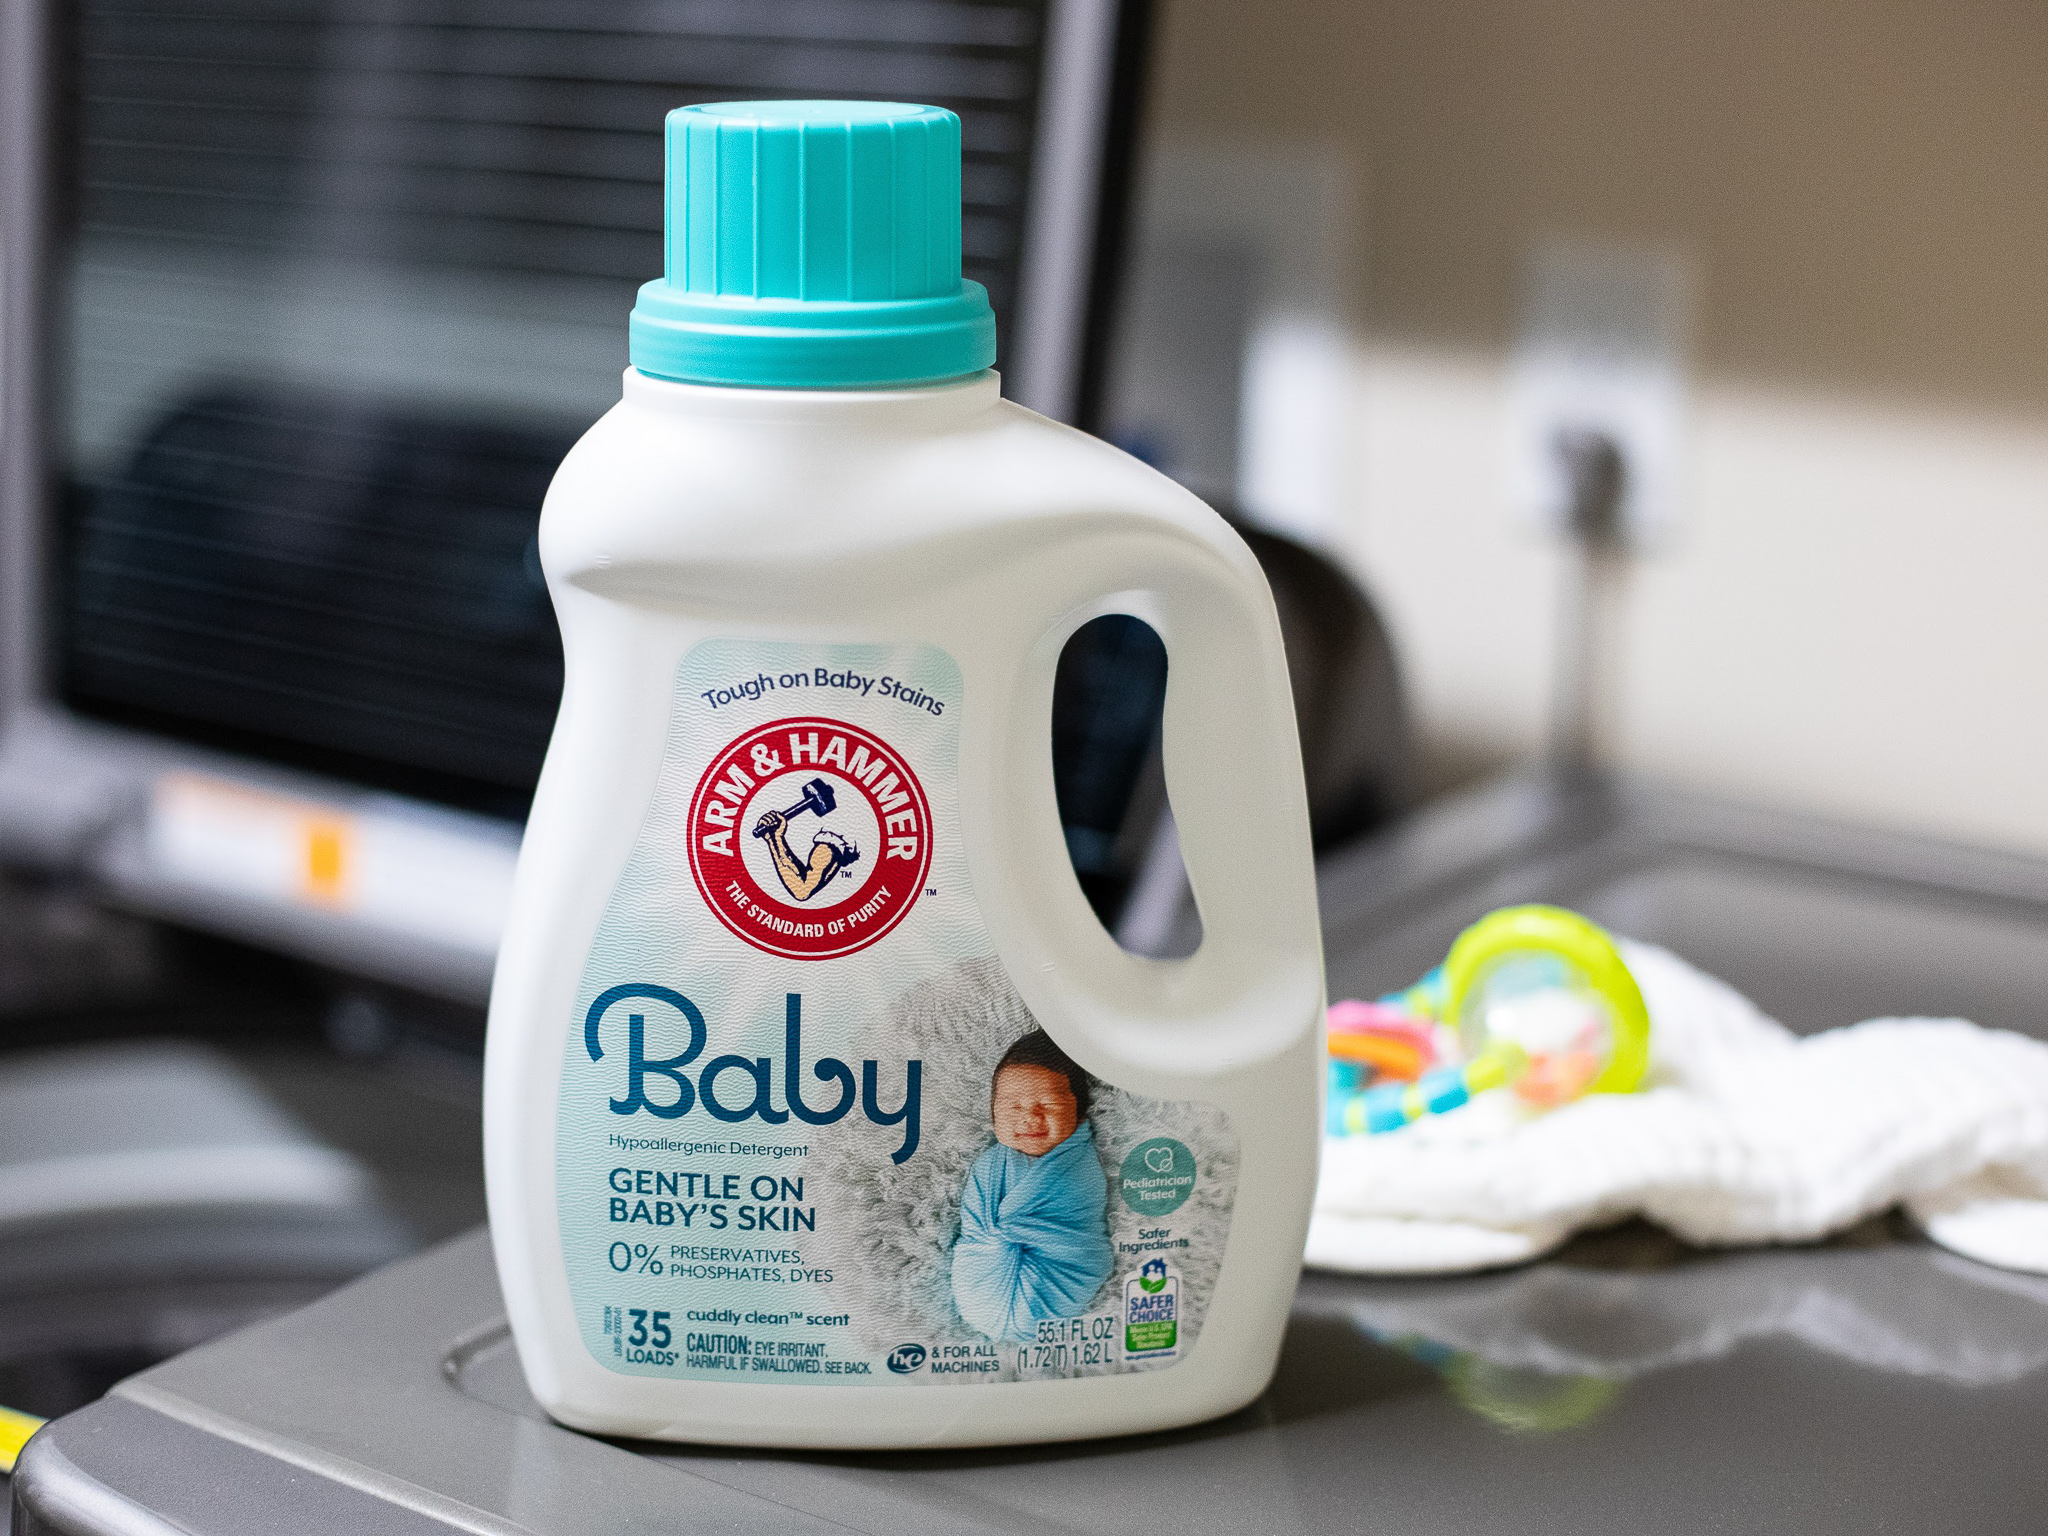 Grab Arm & Hammer Baby Detergent As Low As $2.25 At Publix